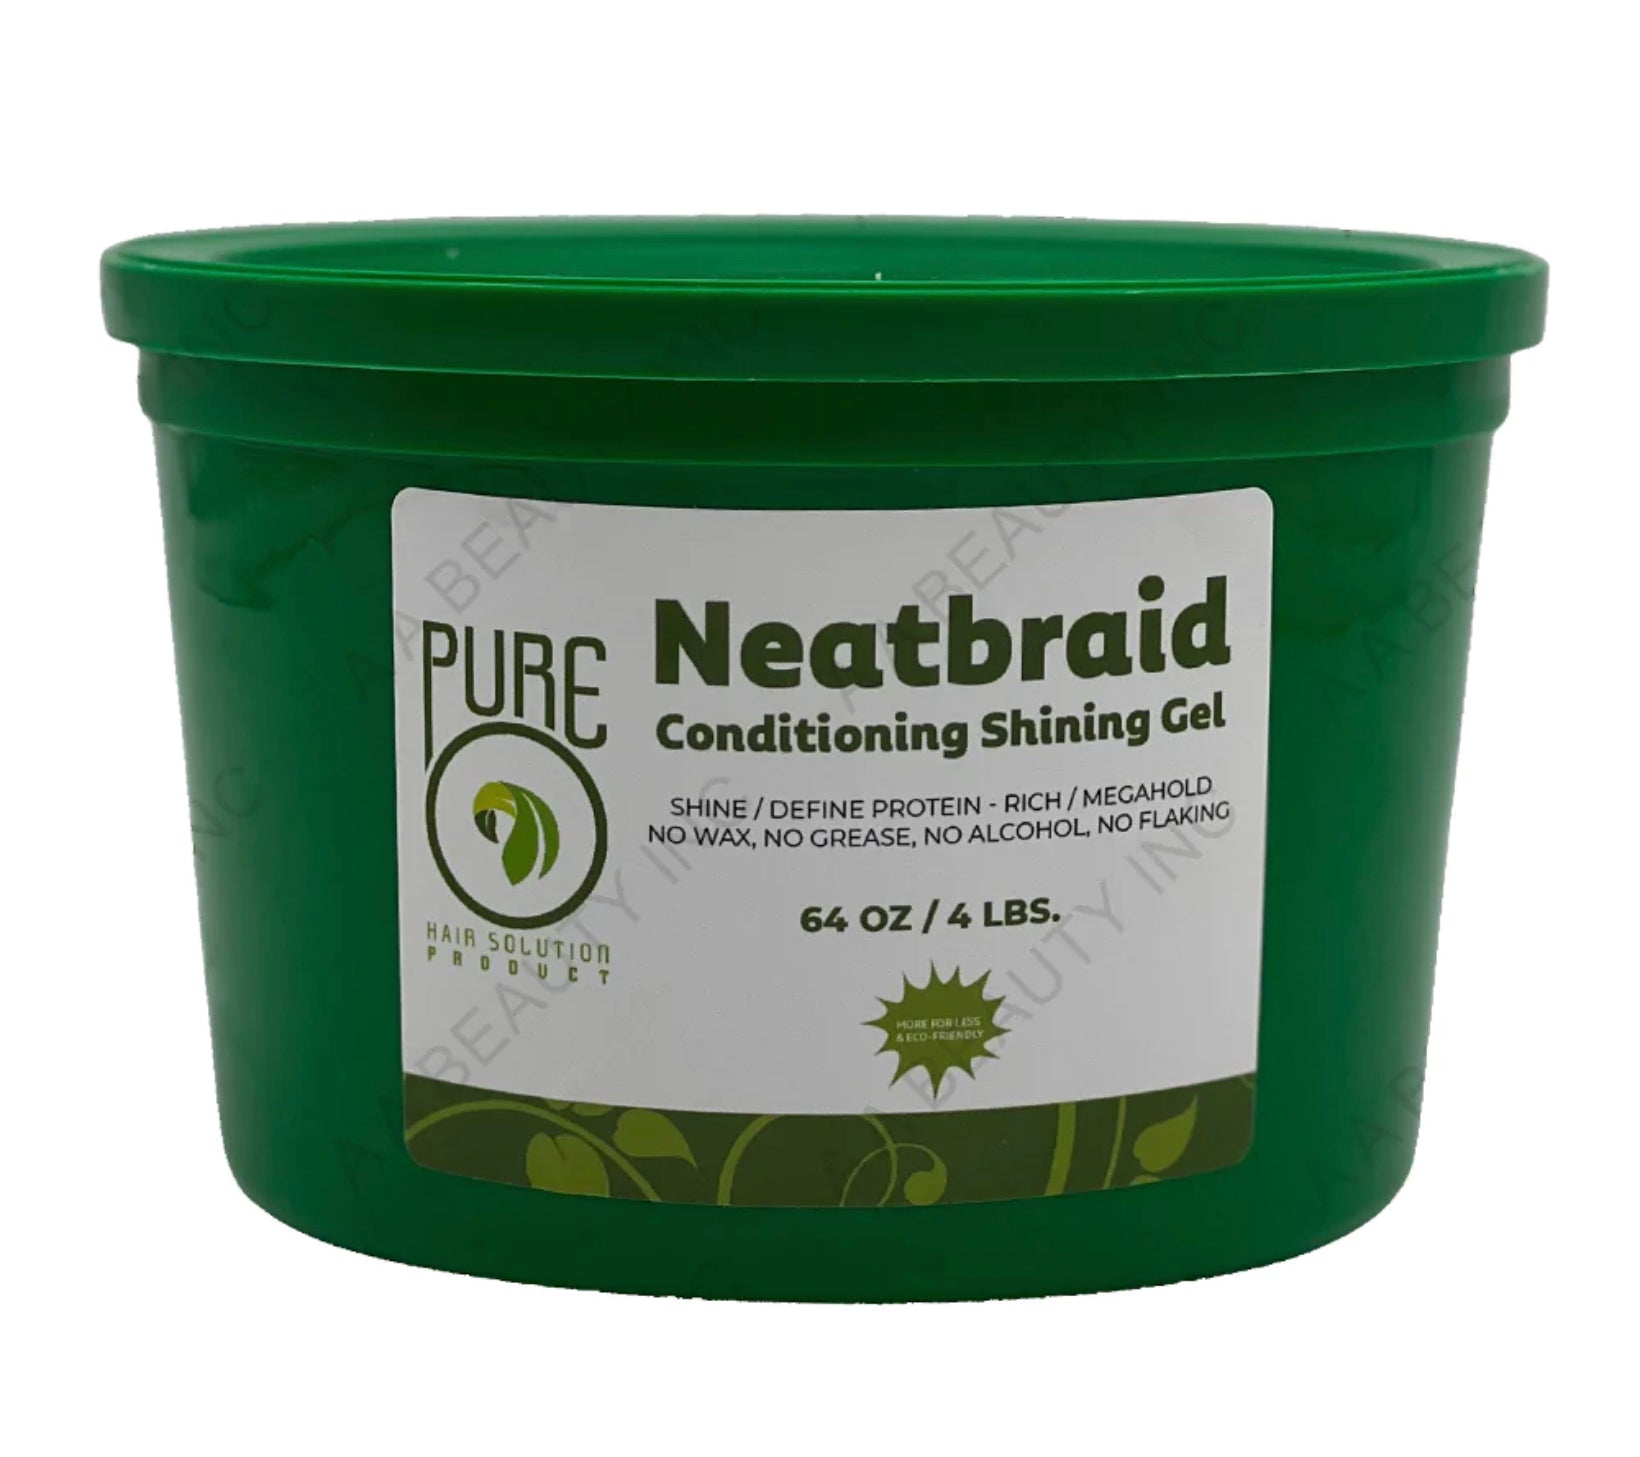 PURE O NATURAL NEATBRAID CONDITIONING GEL AVAILABLE ✨️ 😍 SHINES